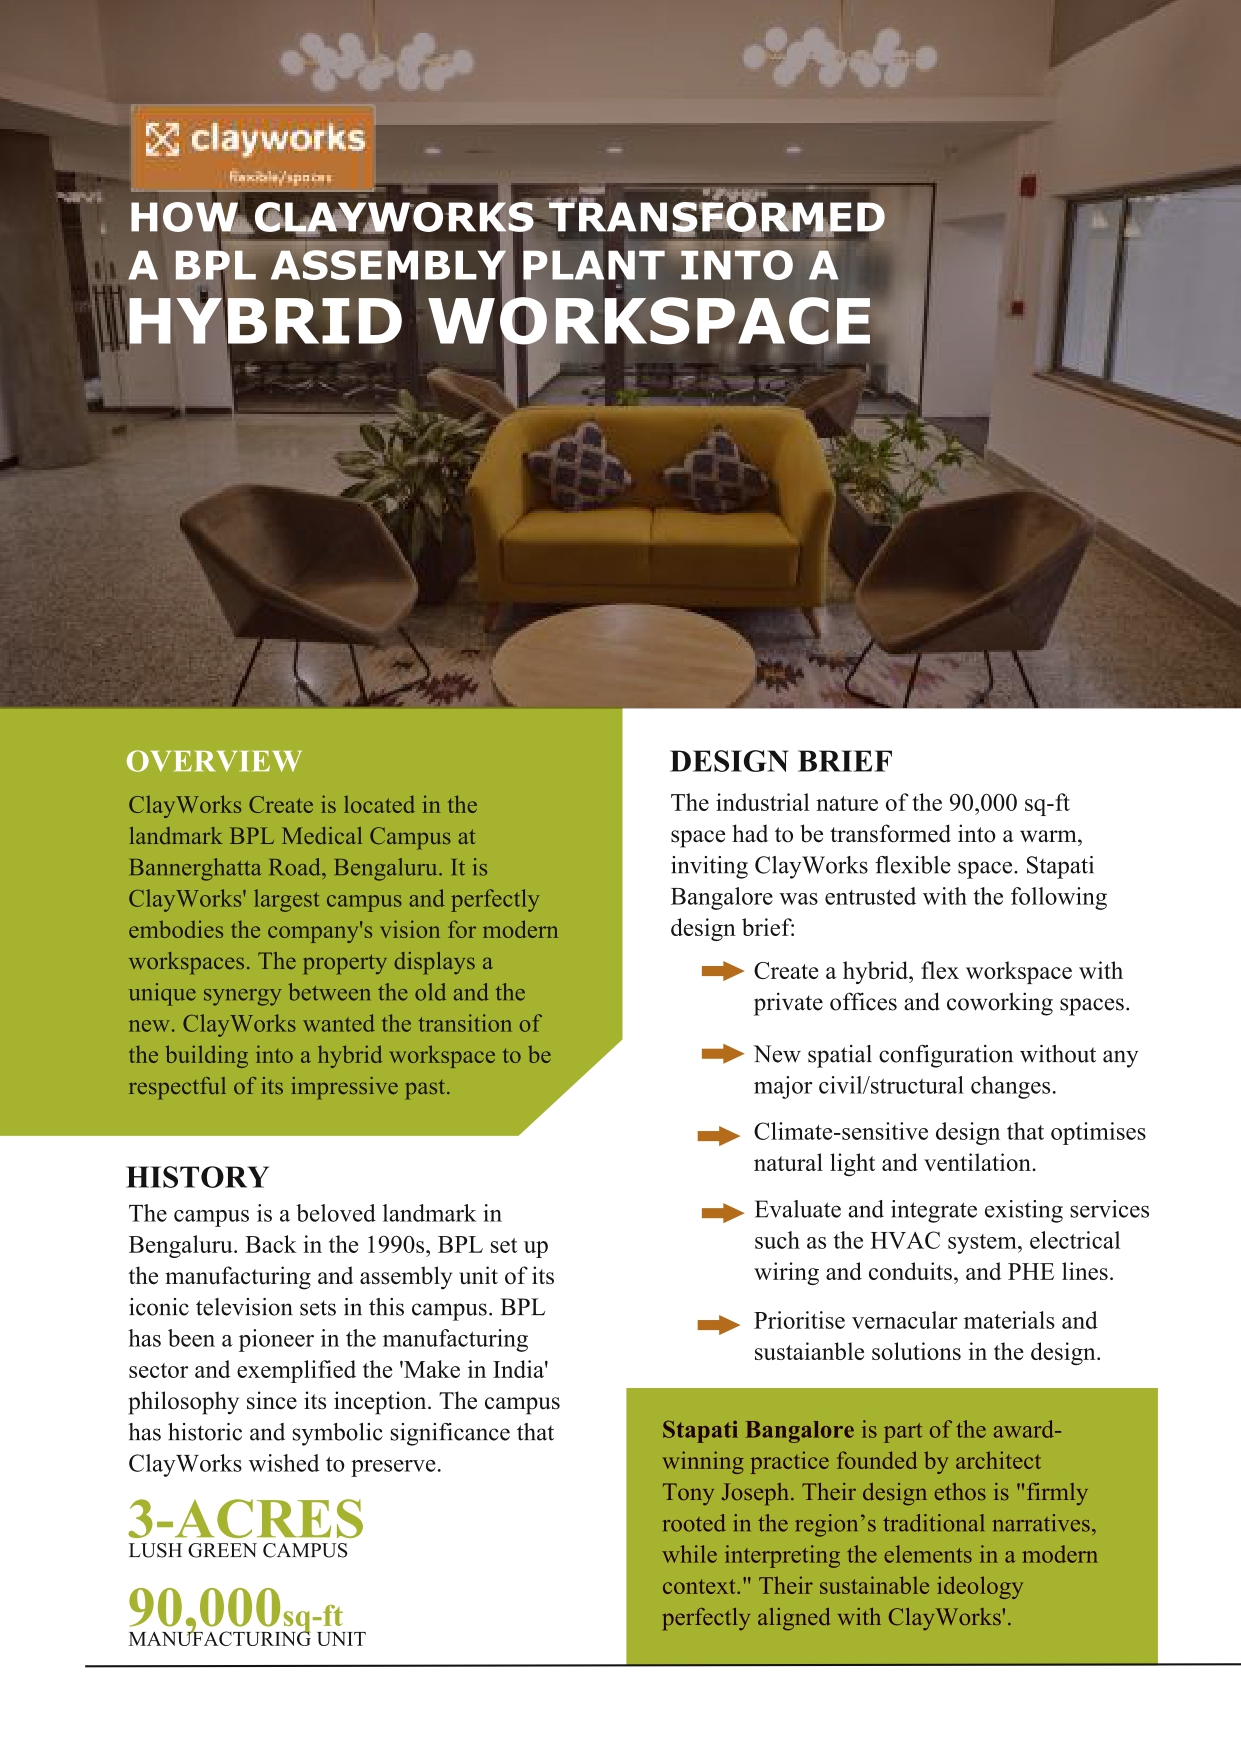 coworking space case study